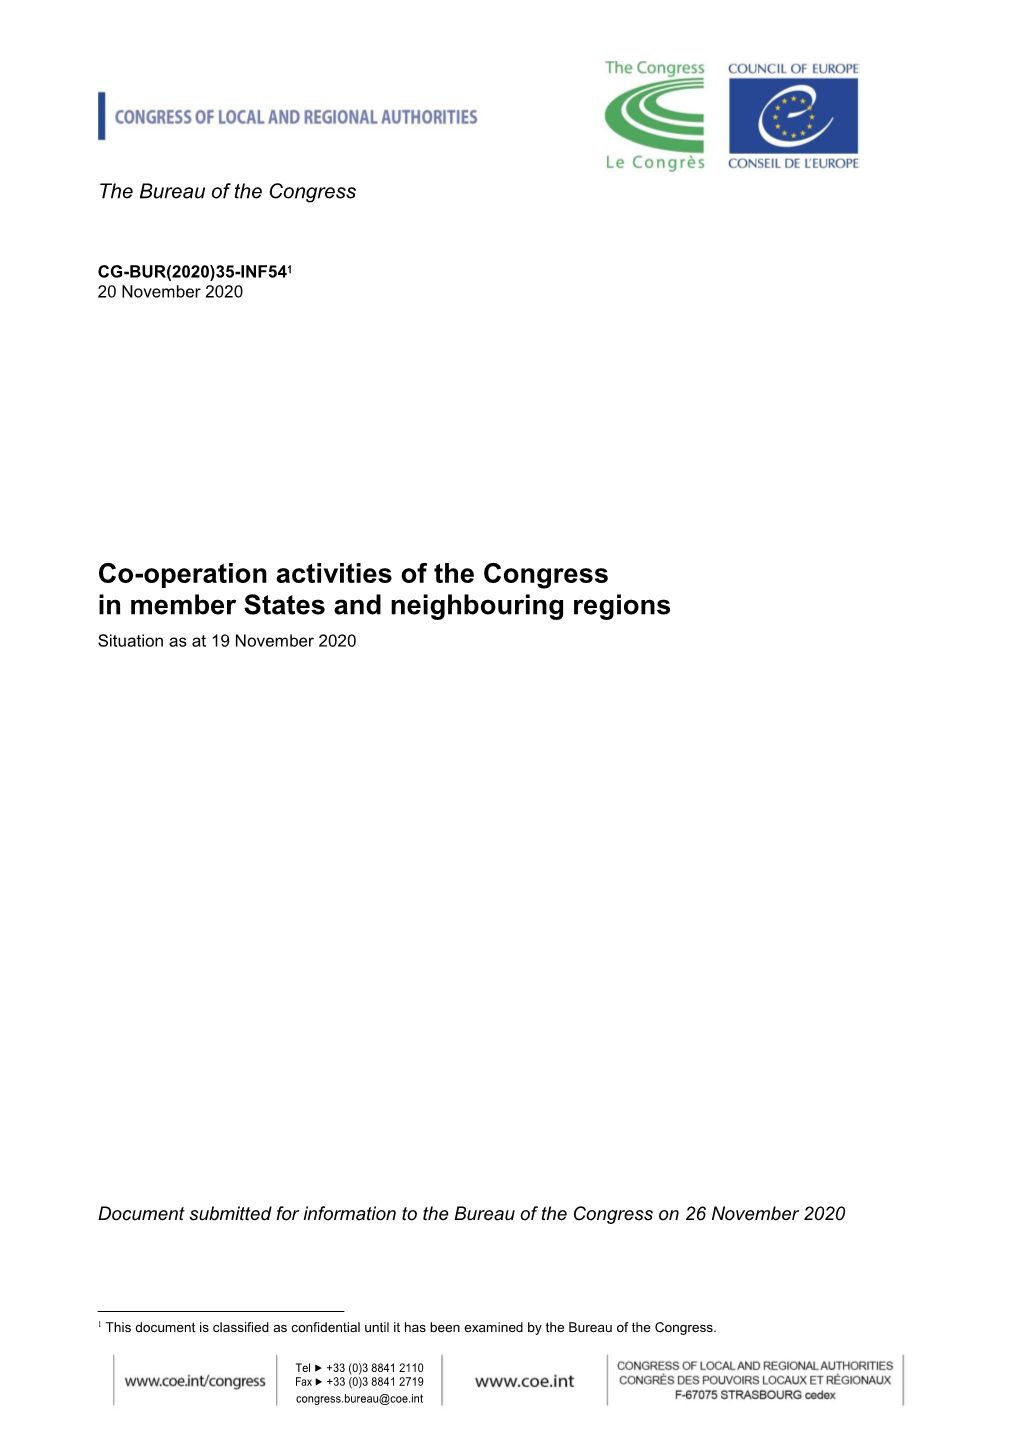 Co-Operation Activities of the Congress in Member States and Neighbouring Regions Situation As at 19 November 2020